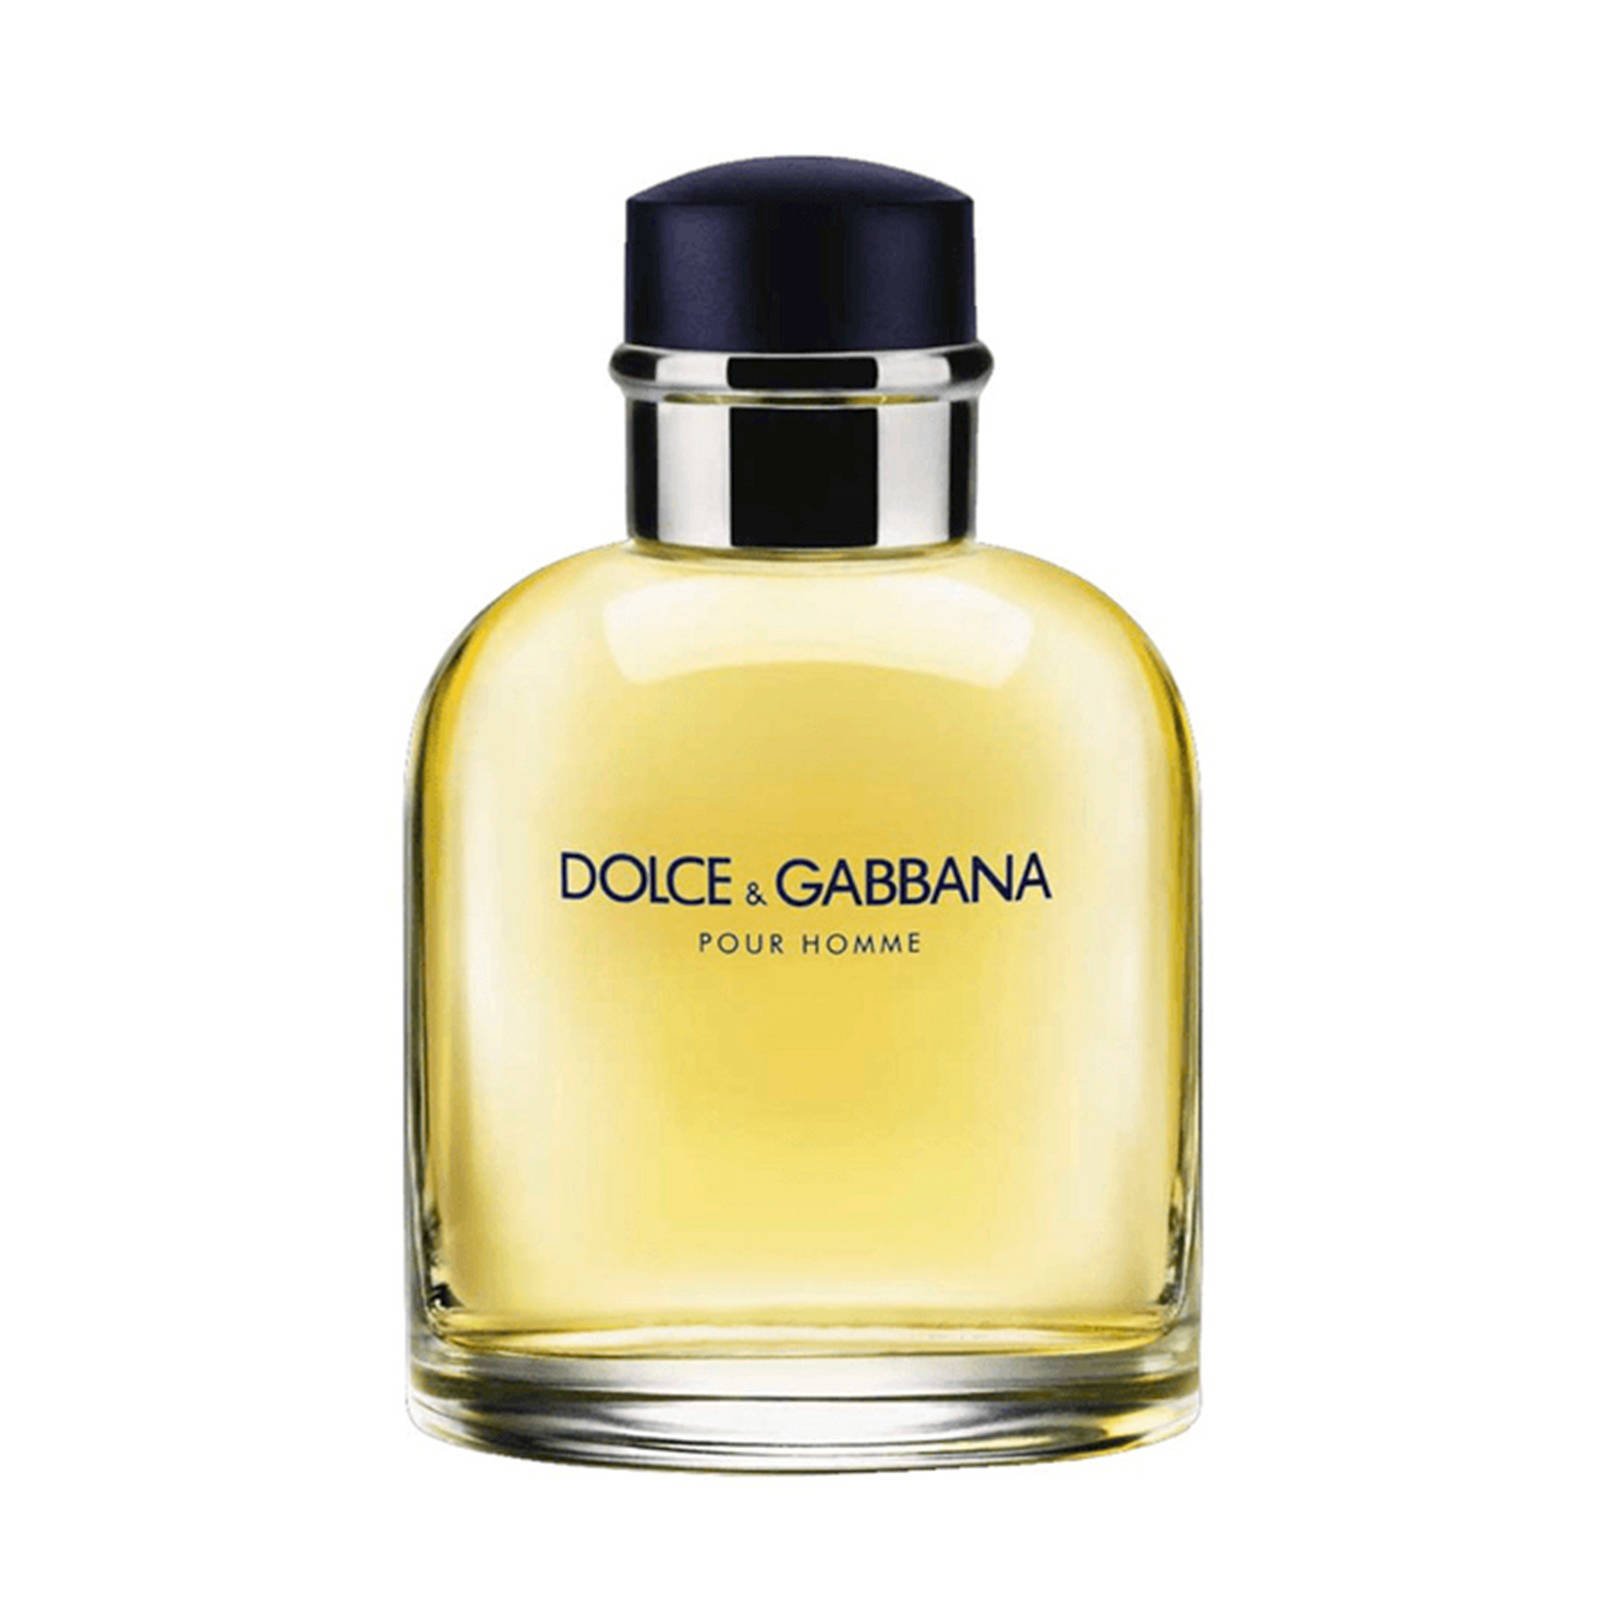 dolce gabbana pour homme after shave balm